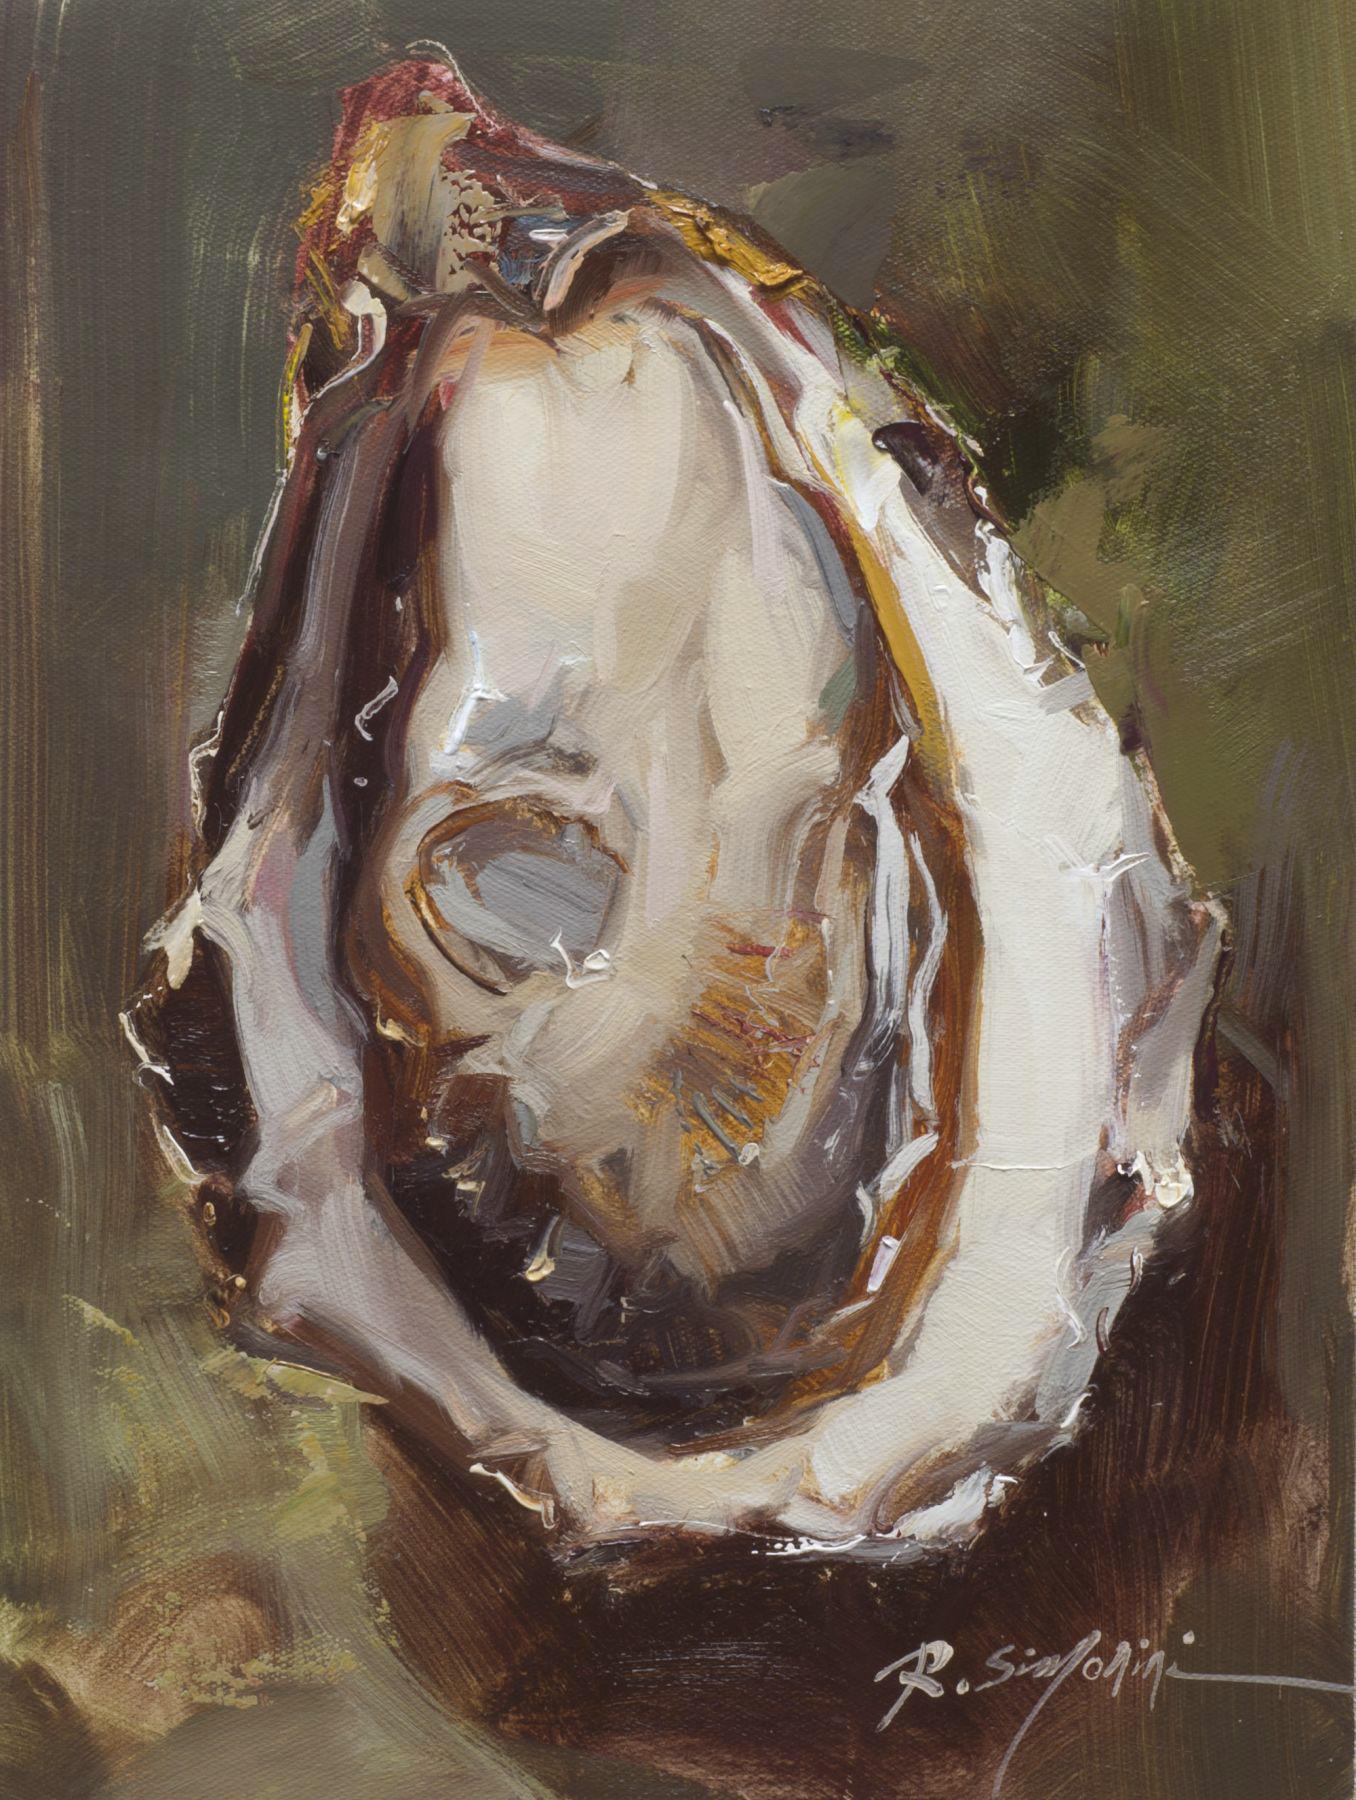 This painting by artist Ray Simonini titled " Perfect Oyster" is a 16x12 nautical oil painting on canvas featuring a close-up of an oyster shell against a deep green and brown background.

About the artist:
Simonini was born in China in 1981. He